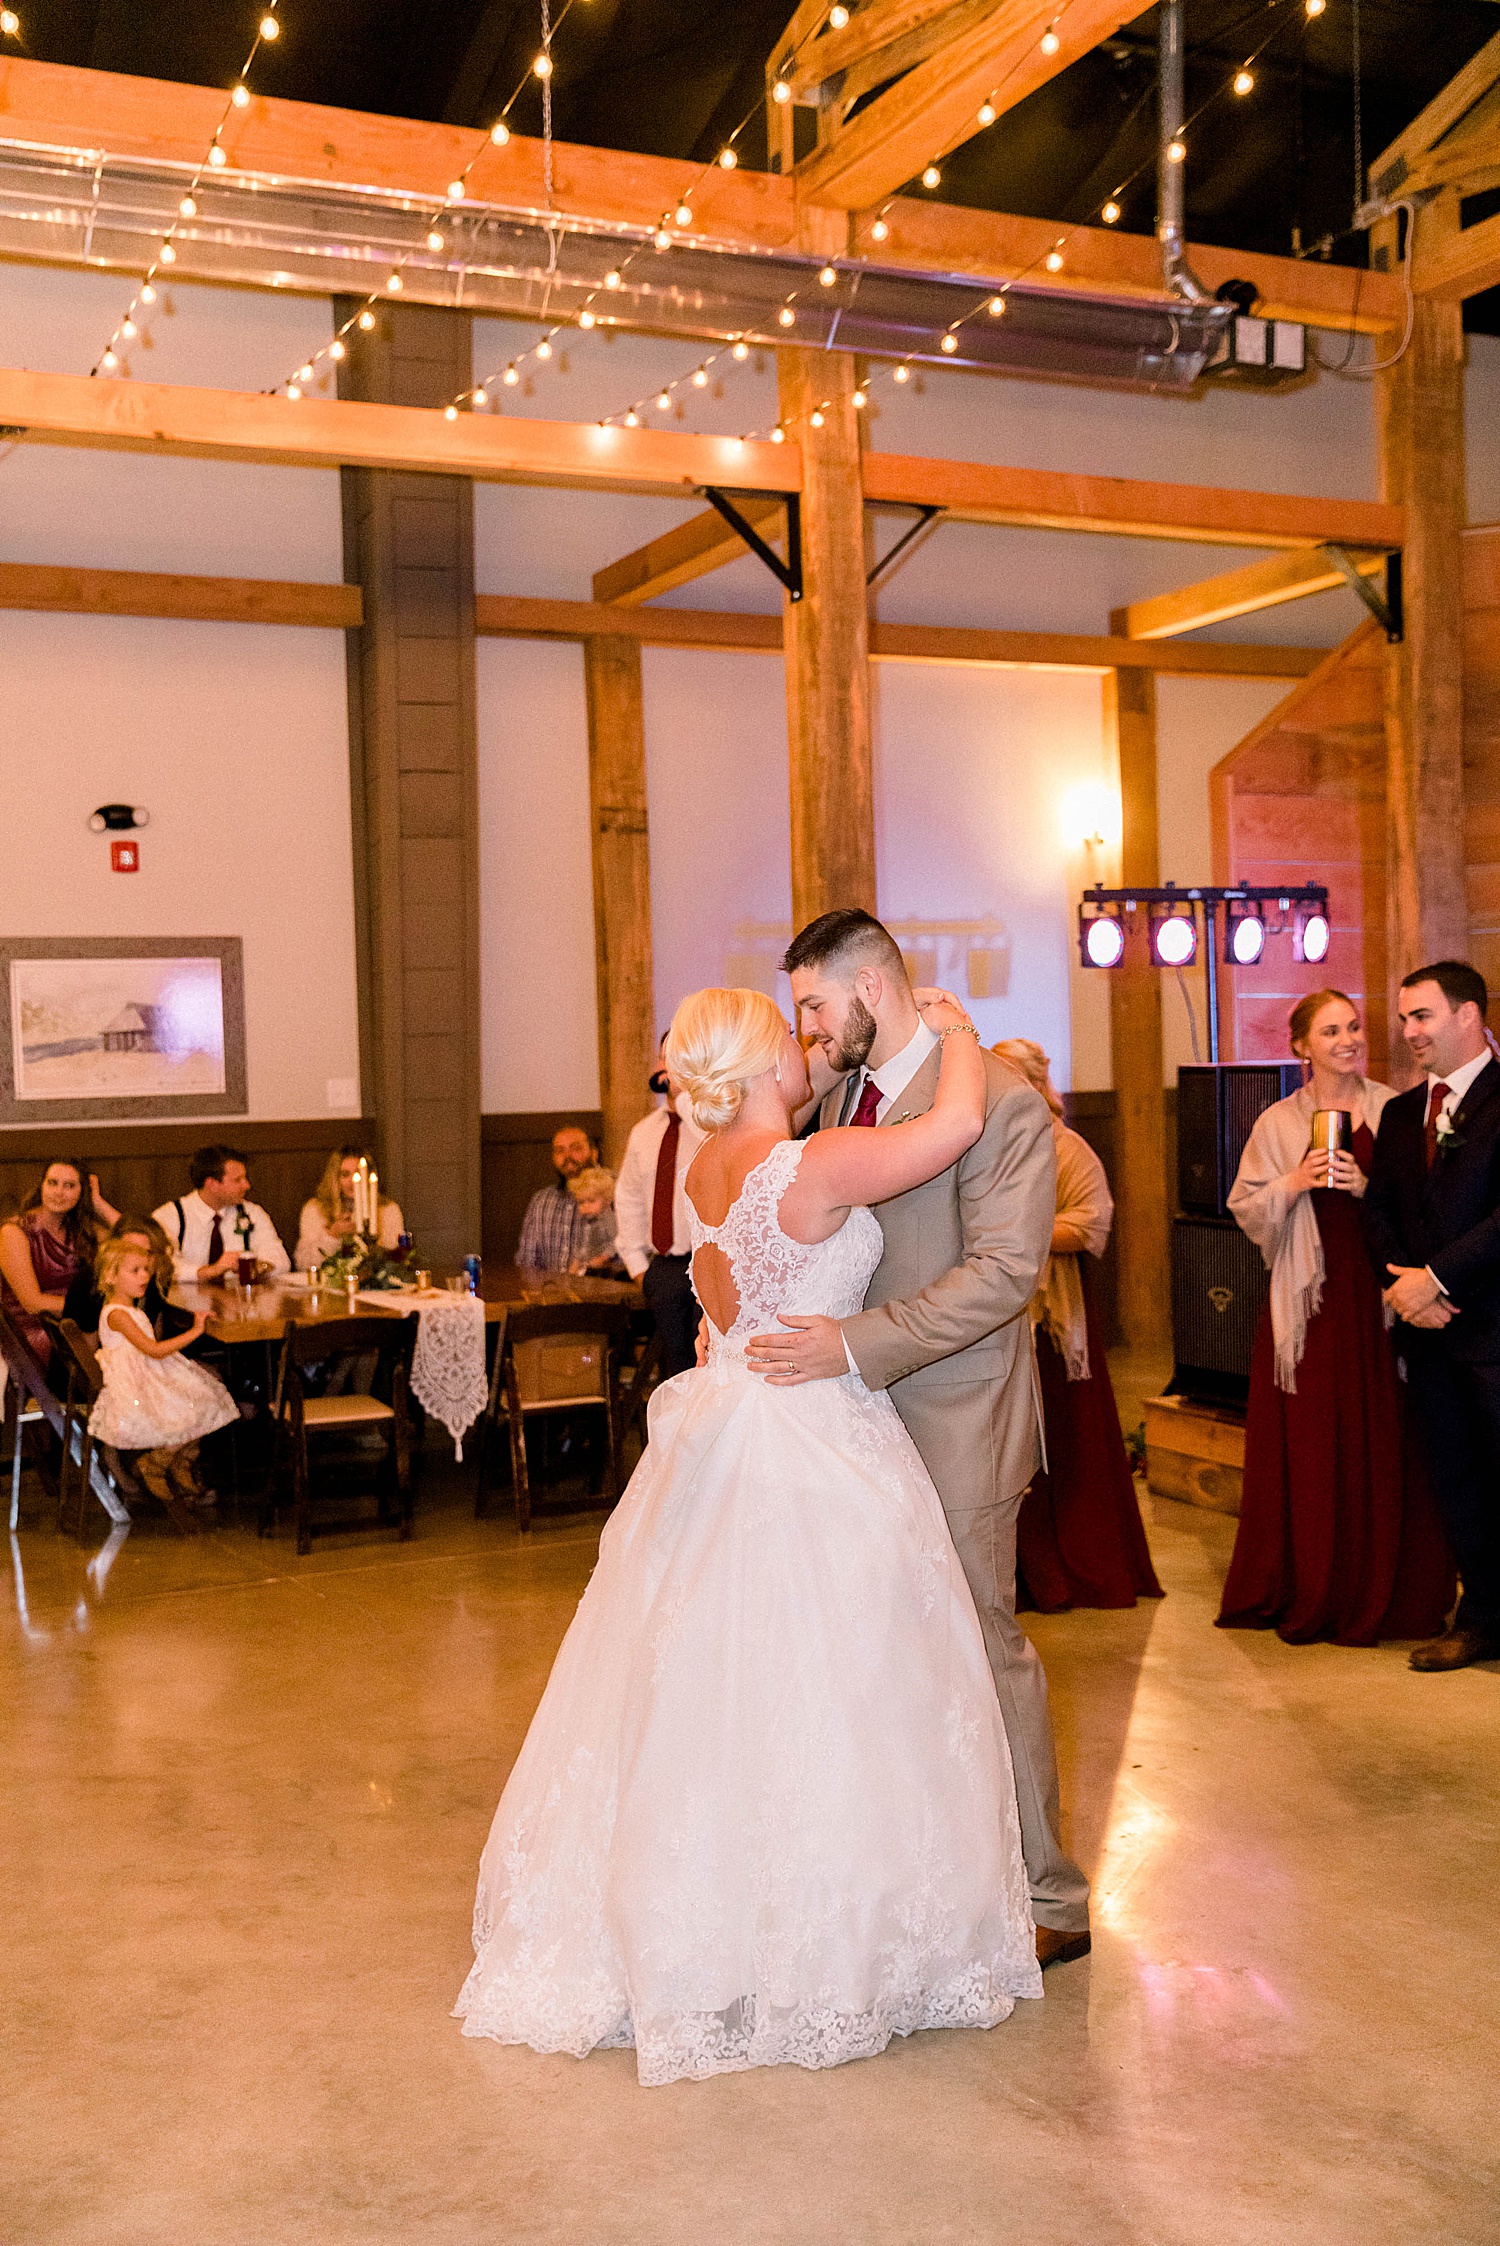 husband and wife share first dance at wedding reception